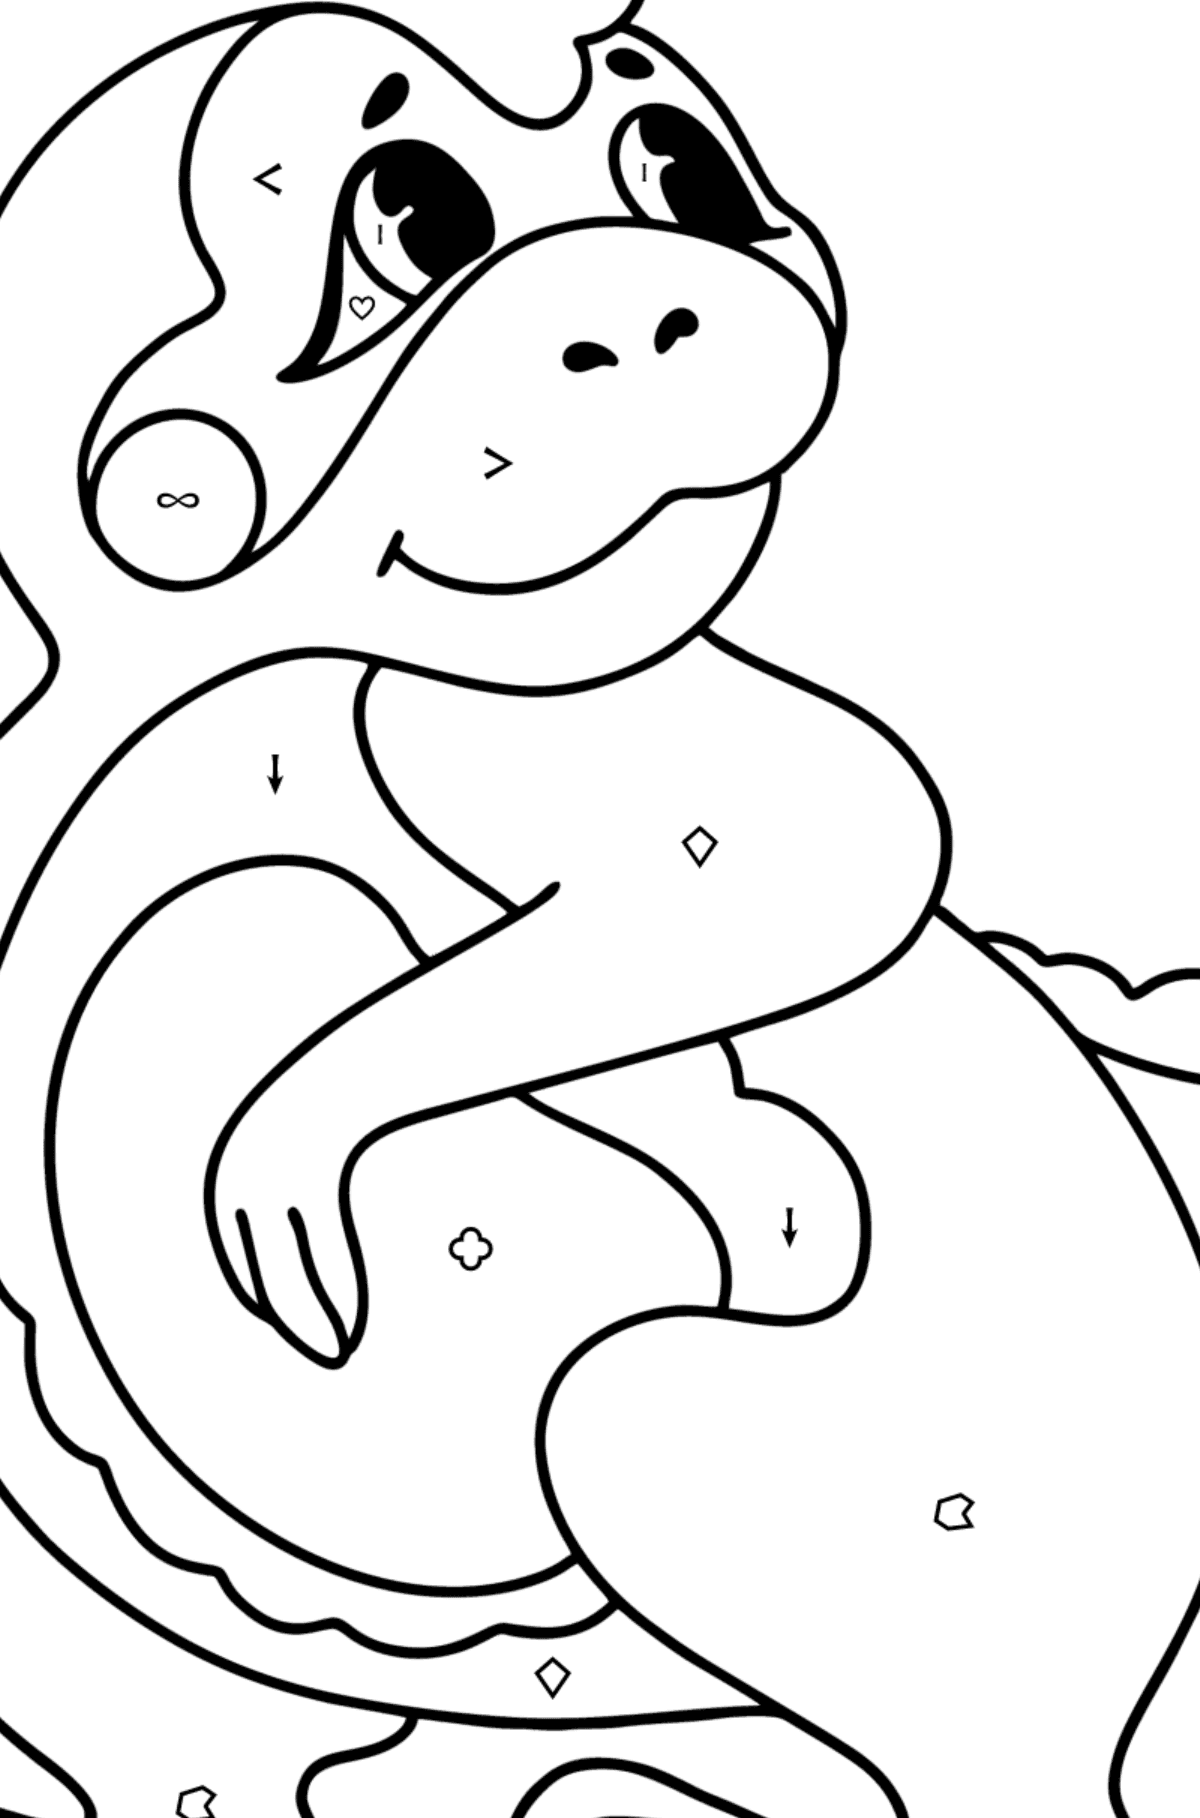 Baby dragon coloring page - Coloring by Symbols and Geometric Shapes for Kids